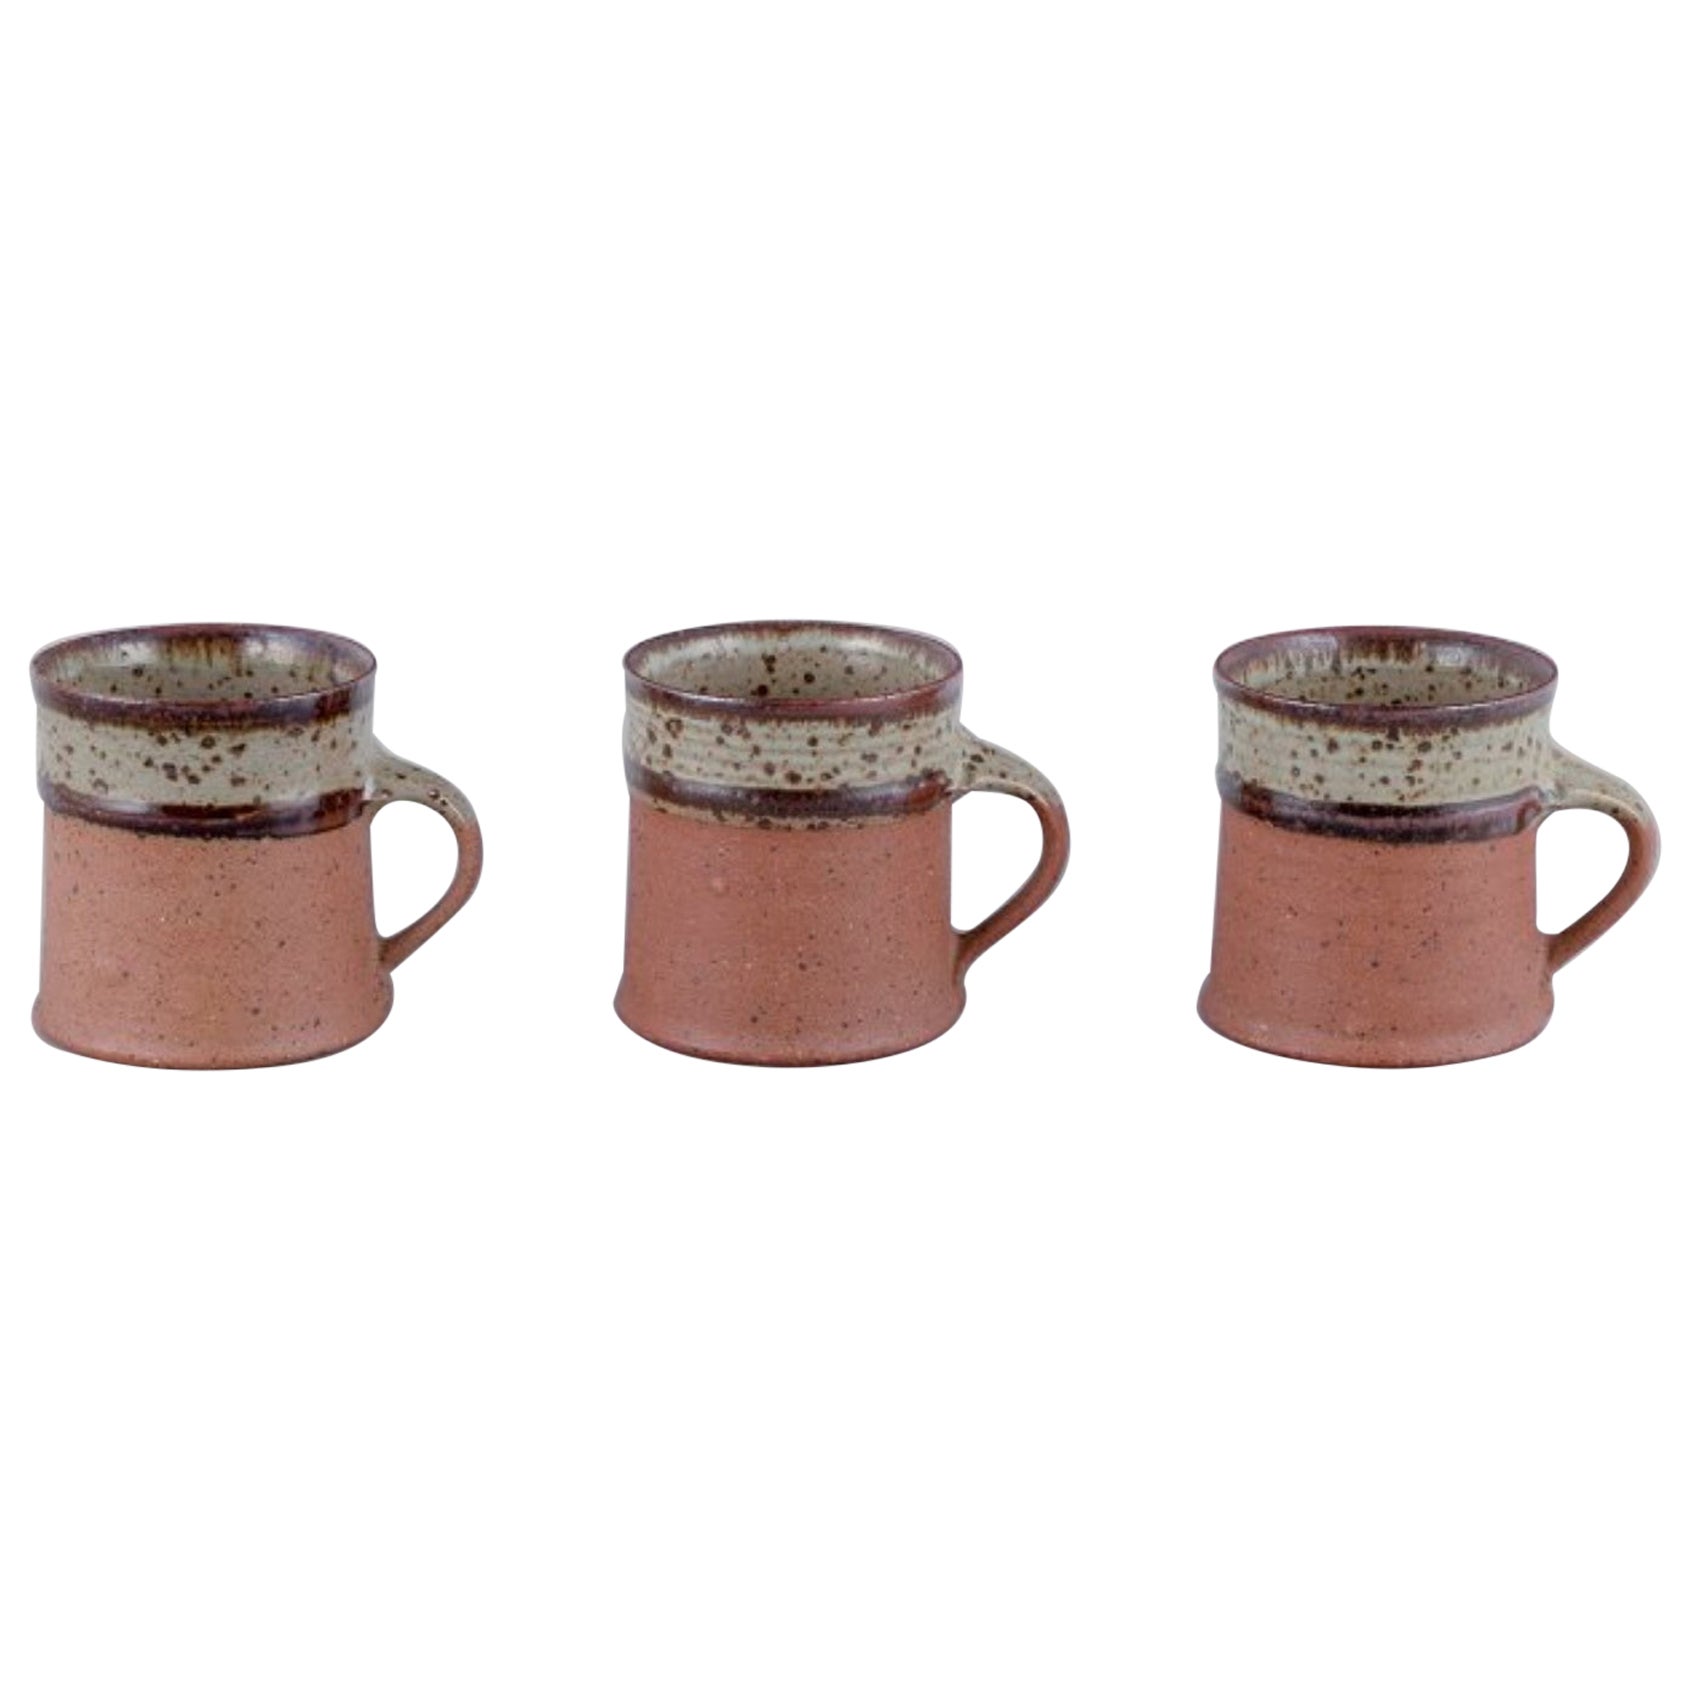 Nysted Ceramics, Denmark. Three ceramic cups in brown shades.